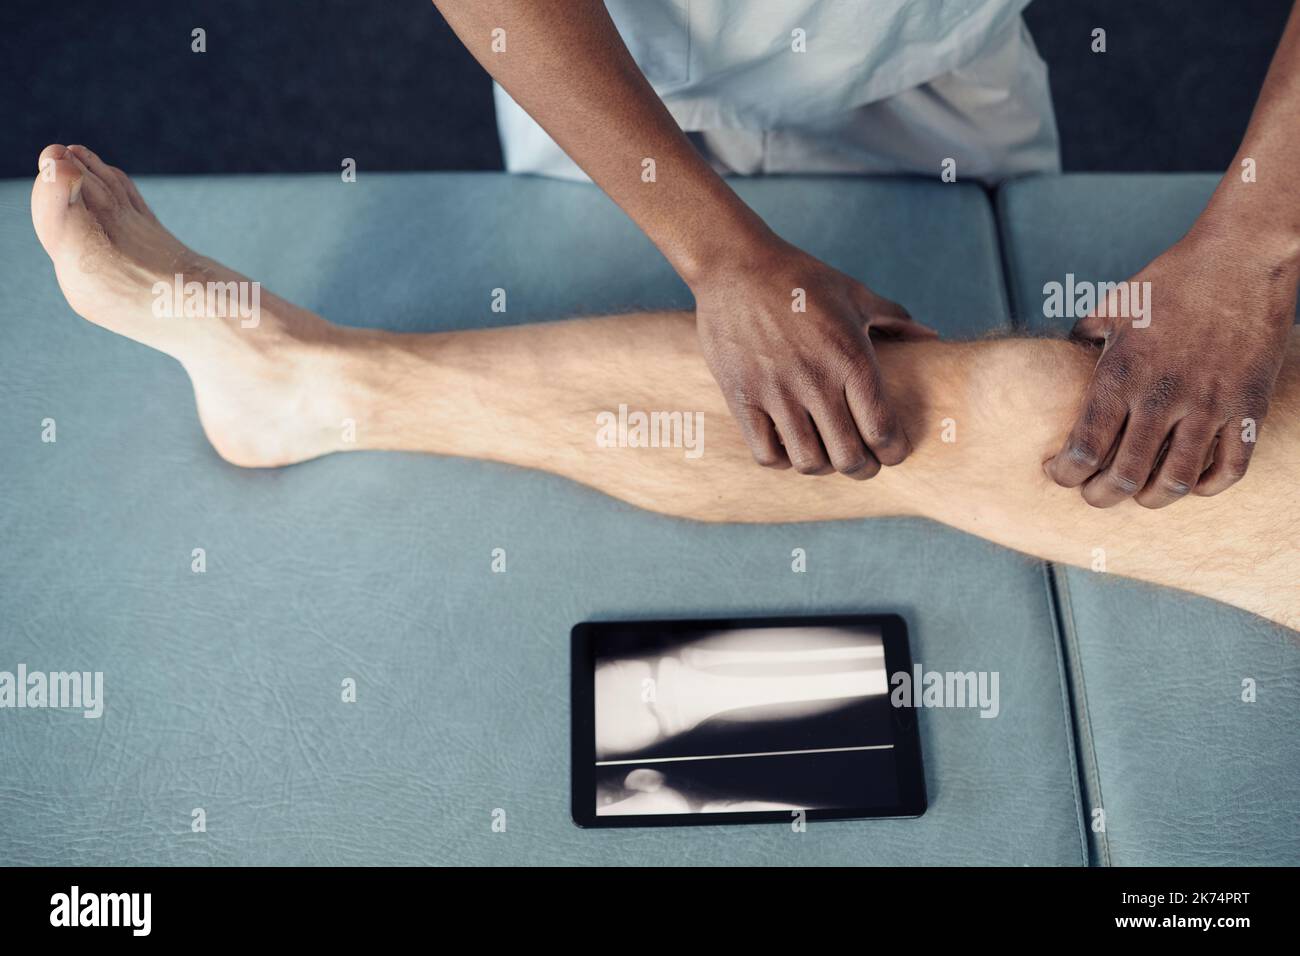 High angle view of therapist making medical massage to patient on the couch using digital tablet Stock Photo